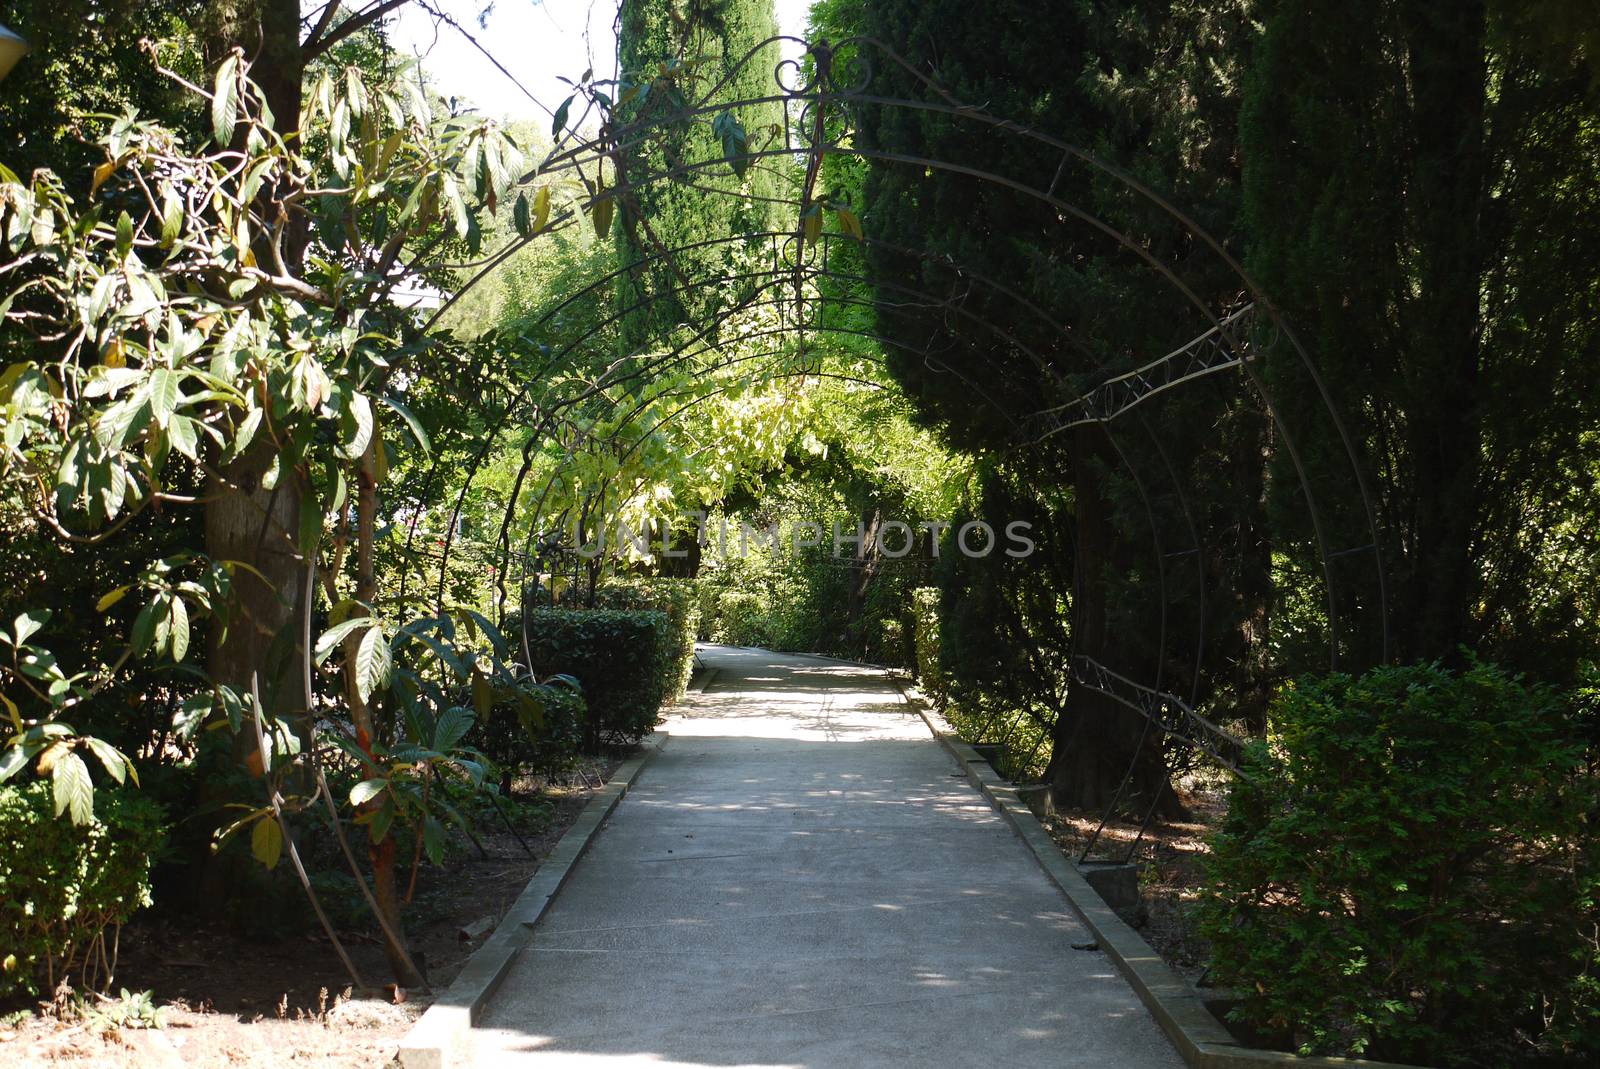 The alley in the park is among the green scenic nature with a wire arch made by hand. A beautiful place for walking with a day off.